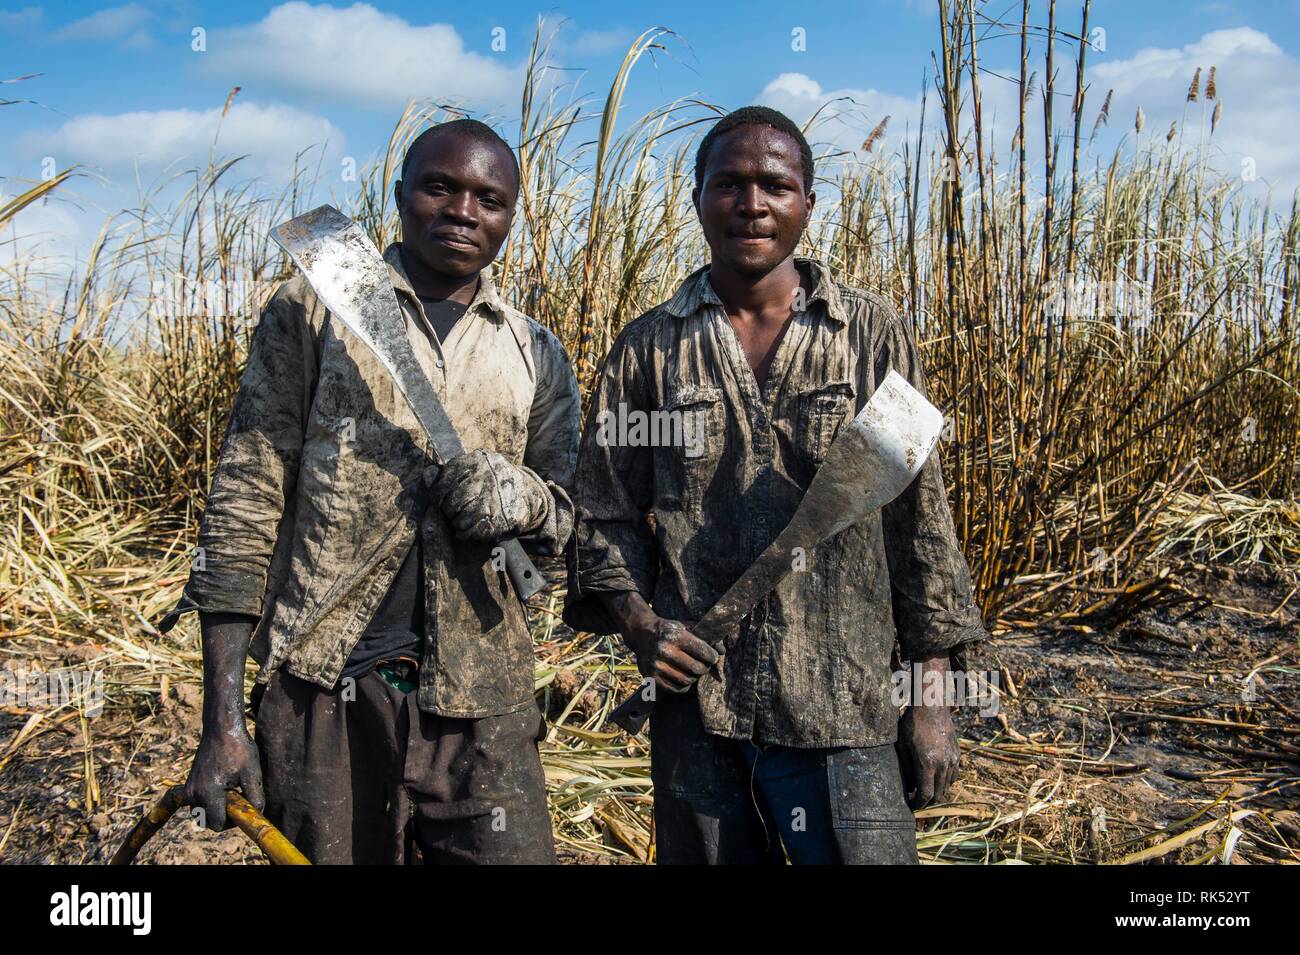 Proud sugar cane cutters in the burned sugar cane fields, Nchalo, Malawi, Africa Stock Photo